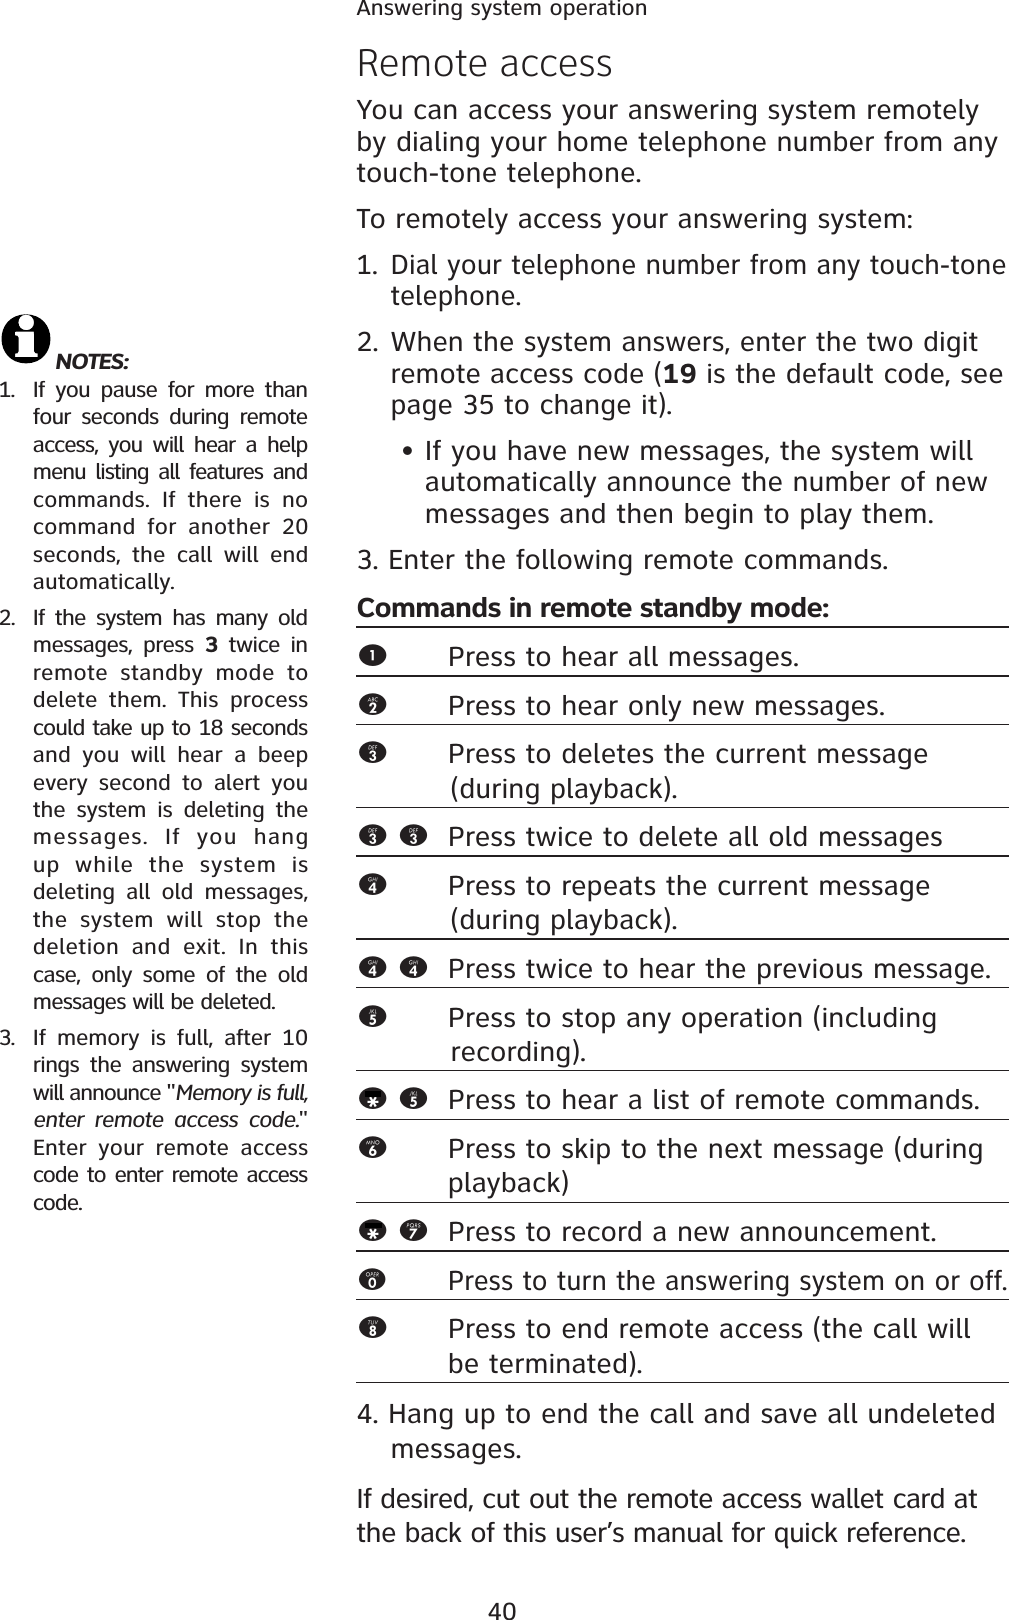 40Answering system operationRemote accessYou can access your answering system remotely by dialing your home telephone number from any touch-tone telephone.To remotely access your answering system:1. Dial your telephone number from any touch-tone telephone.2.When the system answers, enter the two digit remote access code (19 is the default code, see page 35 to change it). • If you have new messages, the system will automatically announce the number of new messages and then begin to play them.3. Enter the following remote commands.Commands in remote standby mode:1Press to hear all messages.2Press to hear only new messages.3Press to deletes the current message           (during playback).33 Press twice to delete all old messages4Press to repeats the current message           (during playback).44 Press twice to hear the previous message. 5Press to stop any operation (including              recording).*5 Press to hear a list of remote commands.6Press to skip to the next message (during playback)*7 Press to record a new announcement.0Press to turn the answering system on or off.8Press to end remote access (the call will be terminated). 4. Hang up to end the call and save all undeleted messages.If desired, cut out the remote access wallet card at the back of this user’s manual for quick reference.NOTES: 1. If you pause for more than four seconds during remote access, you will hear a help menu listing all features and commands. If there is no command for another 20 seconds, the call will end automatically.2. If the system has many old messages, press 3 twice in remote standby mode to delete them. This process could take up to 18 seconds and you will hear a beep every second to alert you the system is deleting the messages. If you hang up while the system is deleting all old messages, the system will stop the deletion and exit. In this case, only some of the old messages will be deleted.3. If memory is full, after 10 rings the answering system will announce &quot;Memory is full, enter remote access code.&quot;Enter your remote access code to enter remote access code.